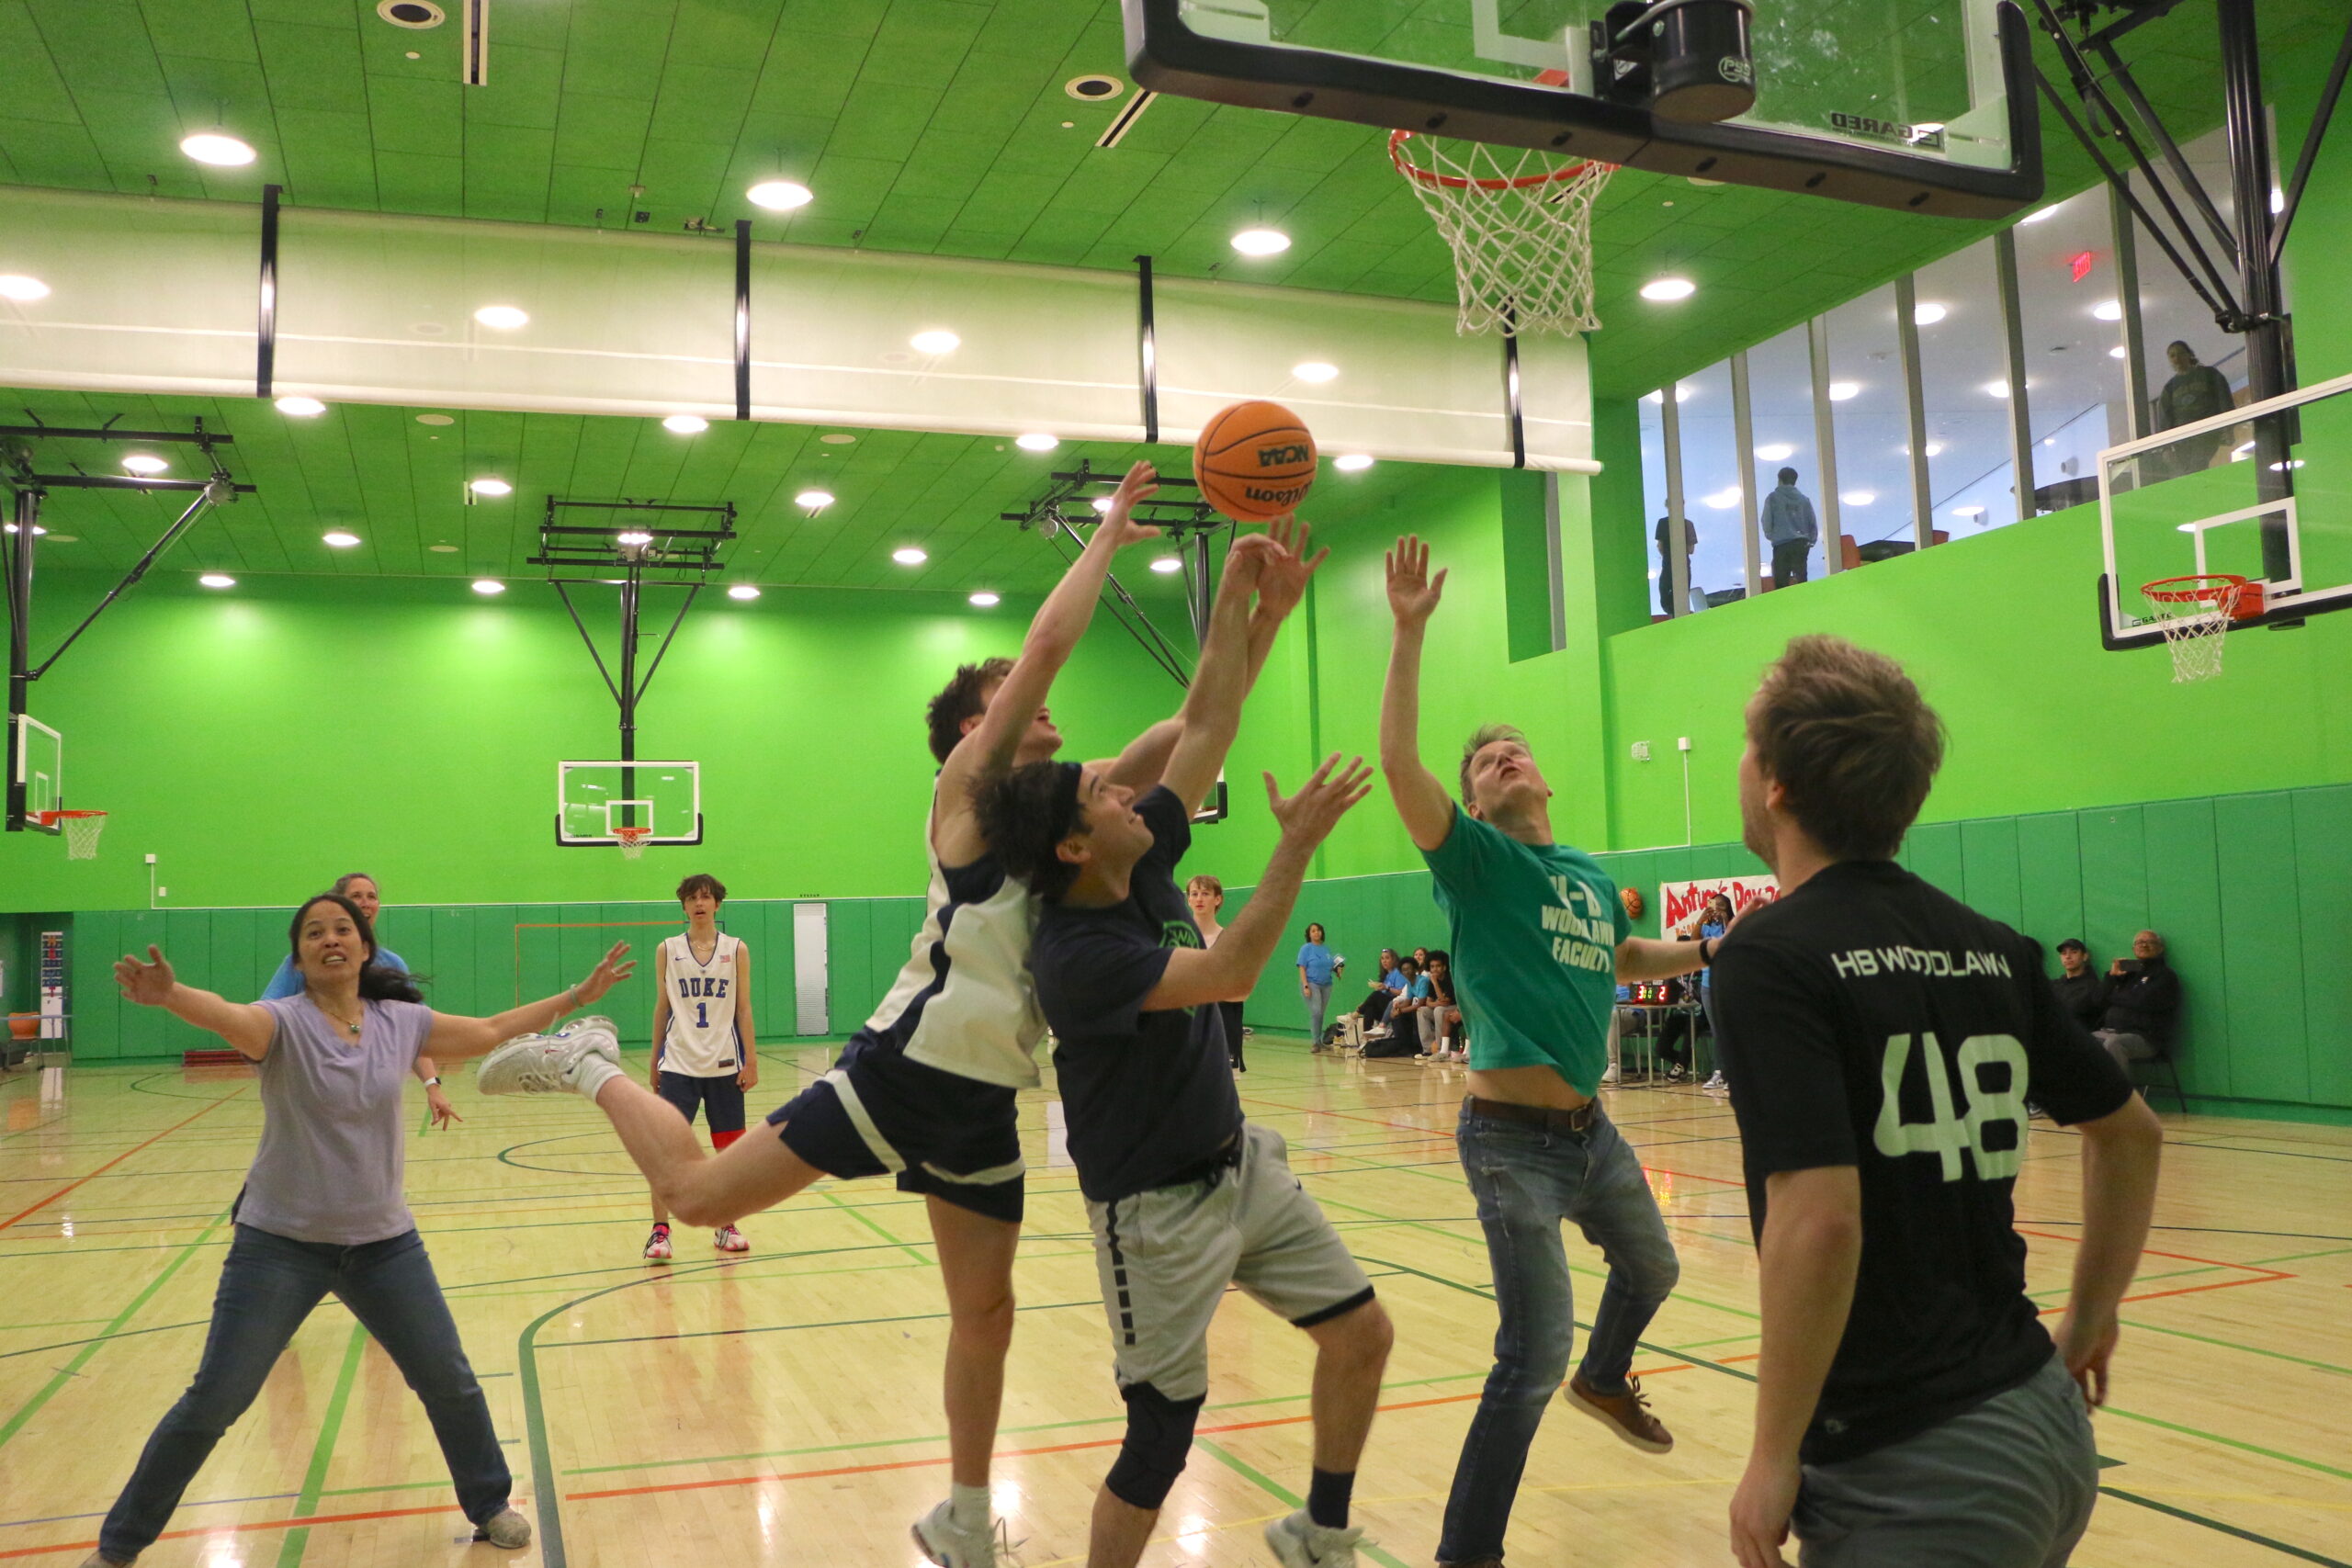 Students and teachers playing a basketball game